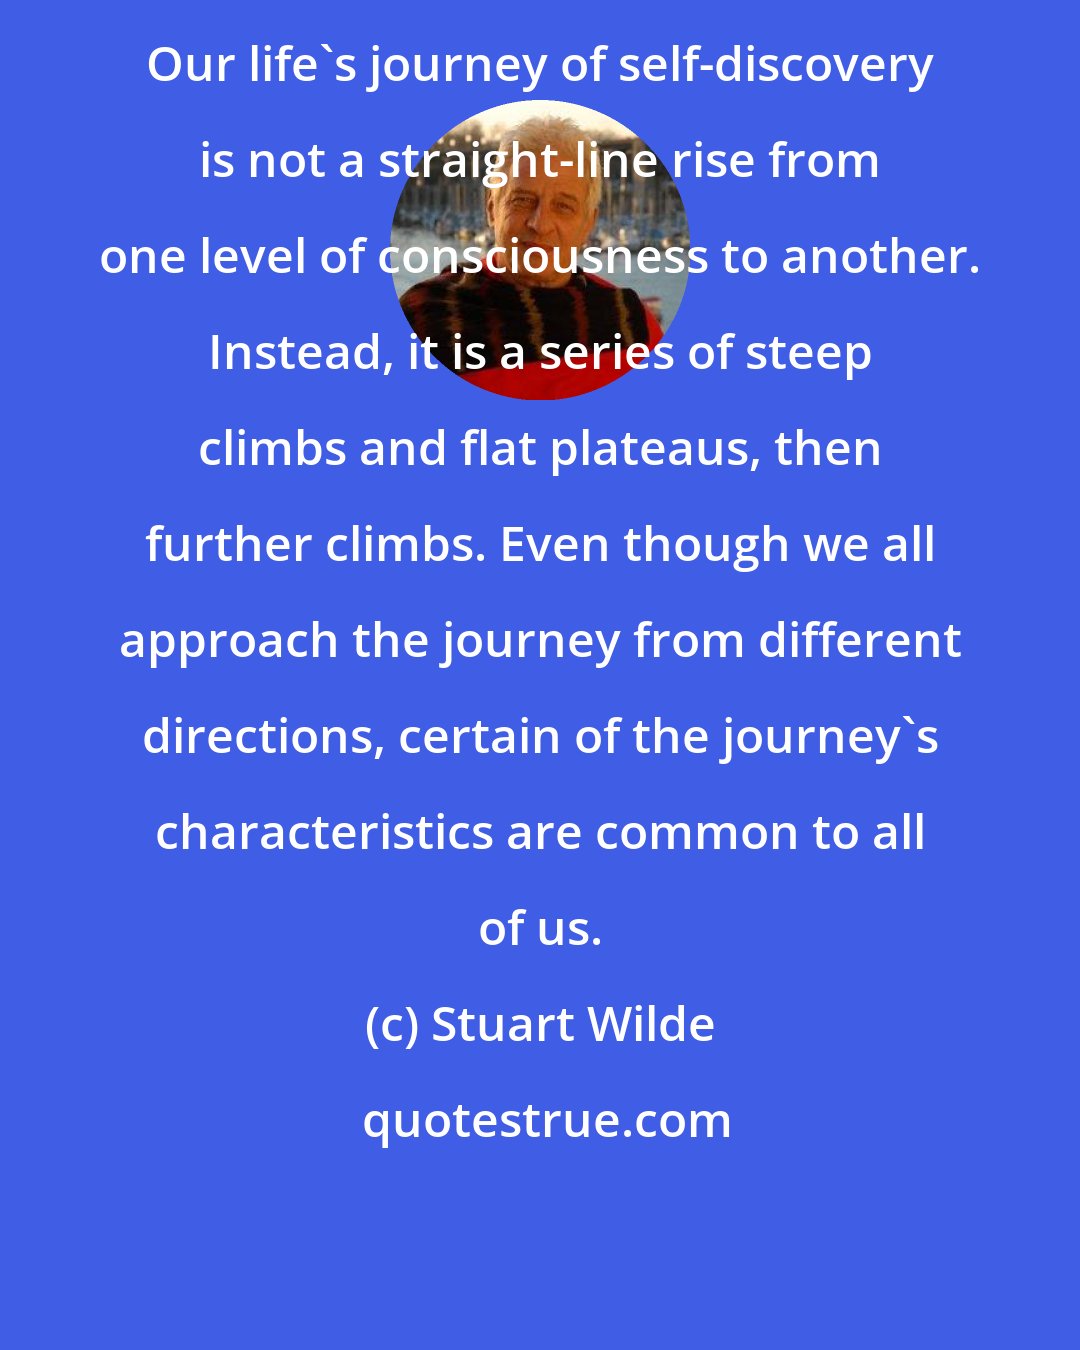 Stuart Wilde: Our life's journey of self-discovery is not a straight-line rise from one level of consciousness to another. Instead, it is a series of steep climbs and flat plateaus, then further climbs. Even though we all approach the journey from different directions, certain of the journey's characteristics are common to all of us.